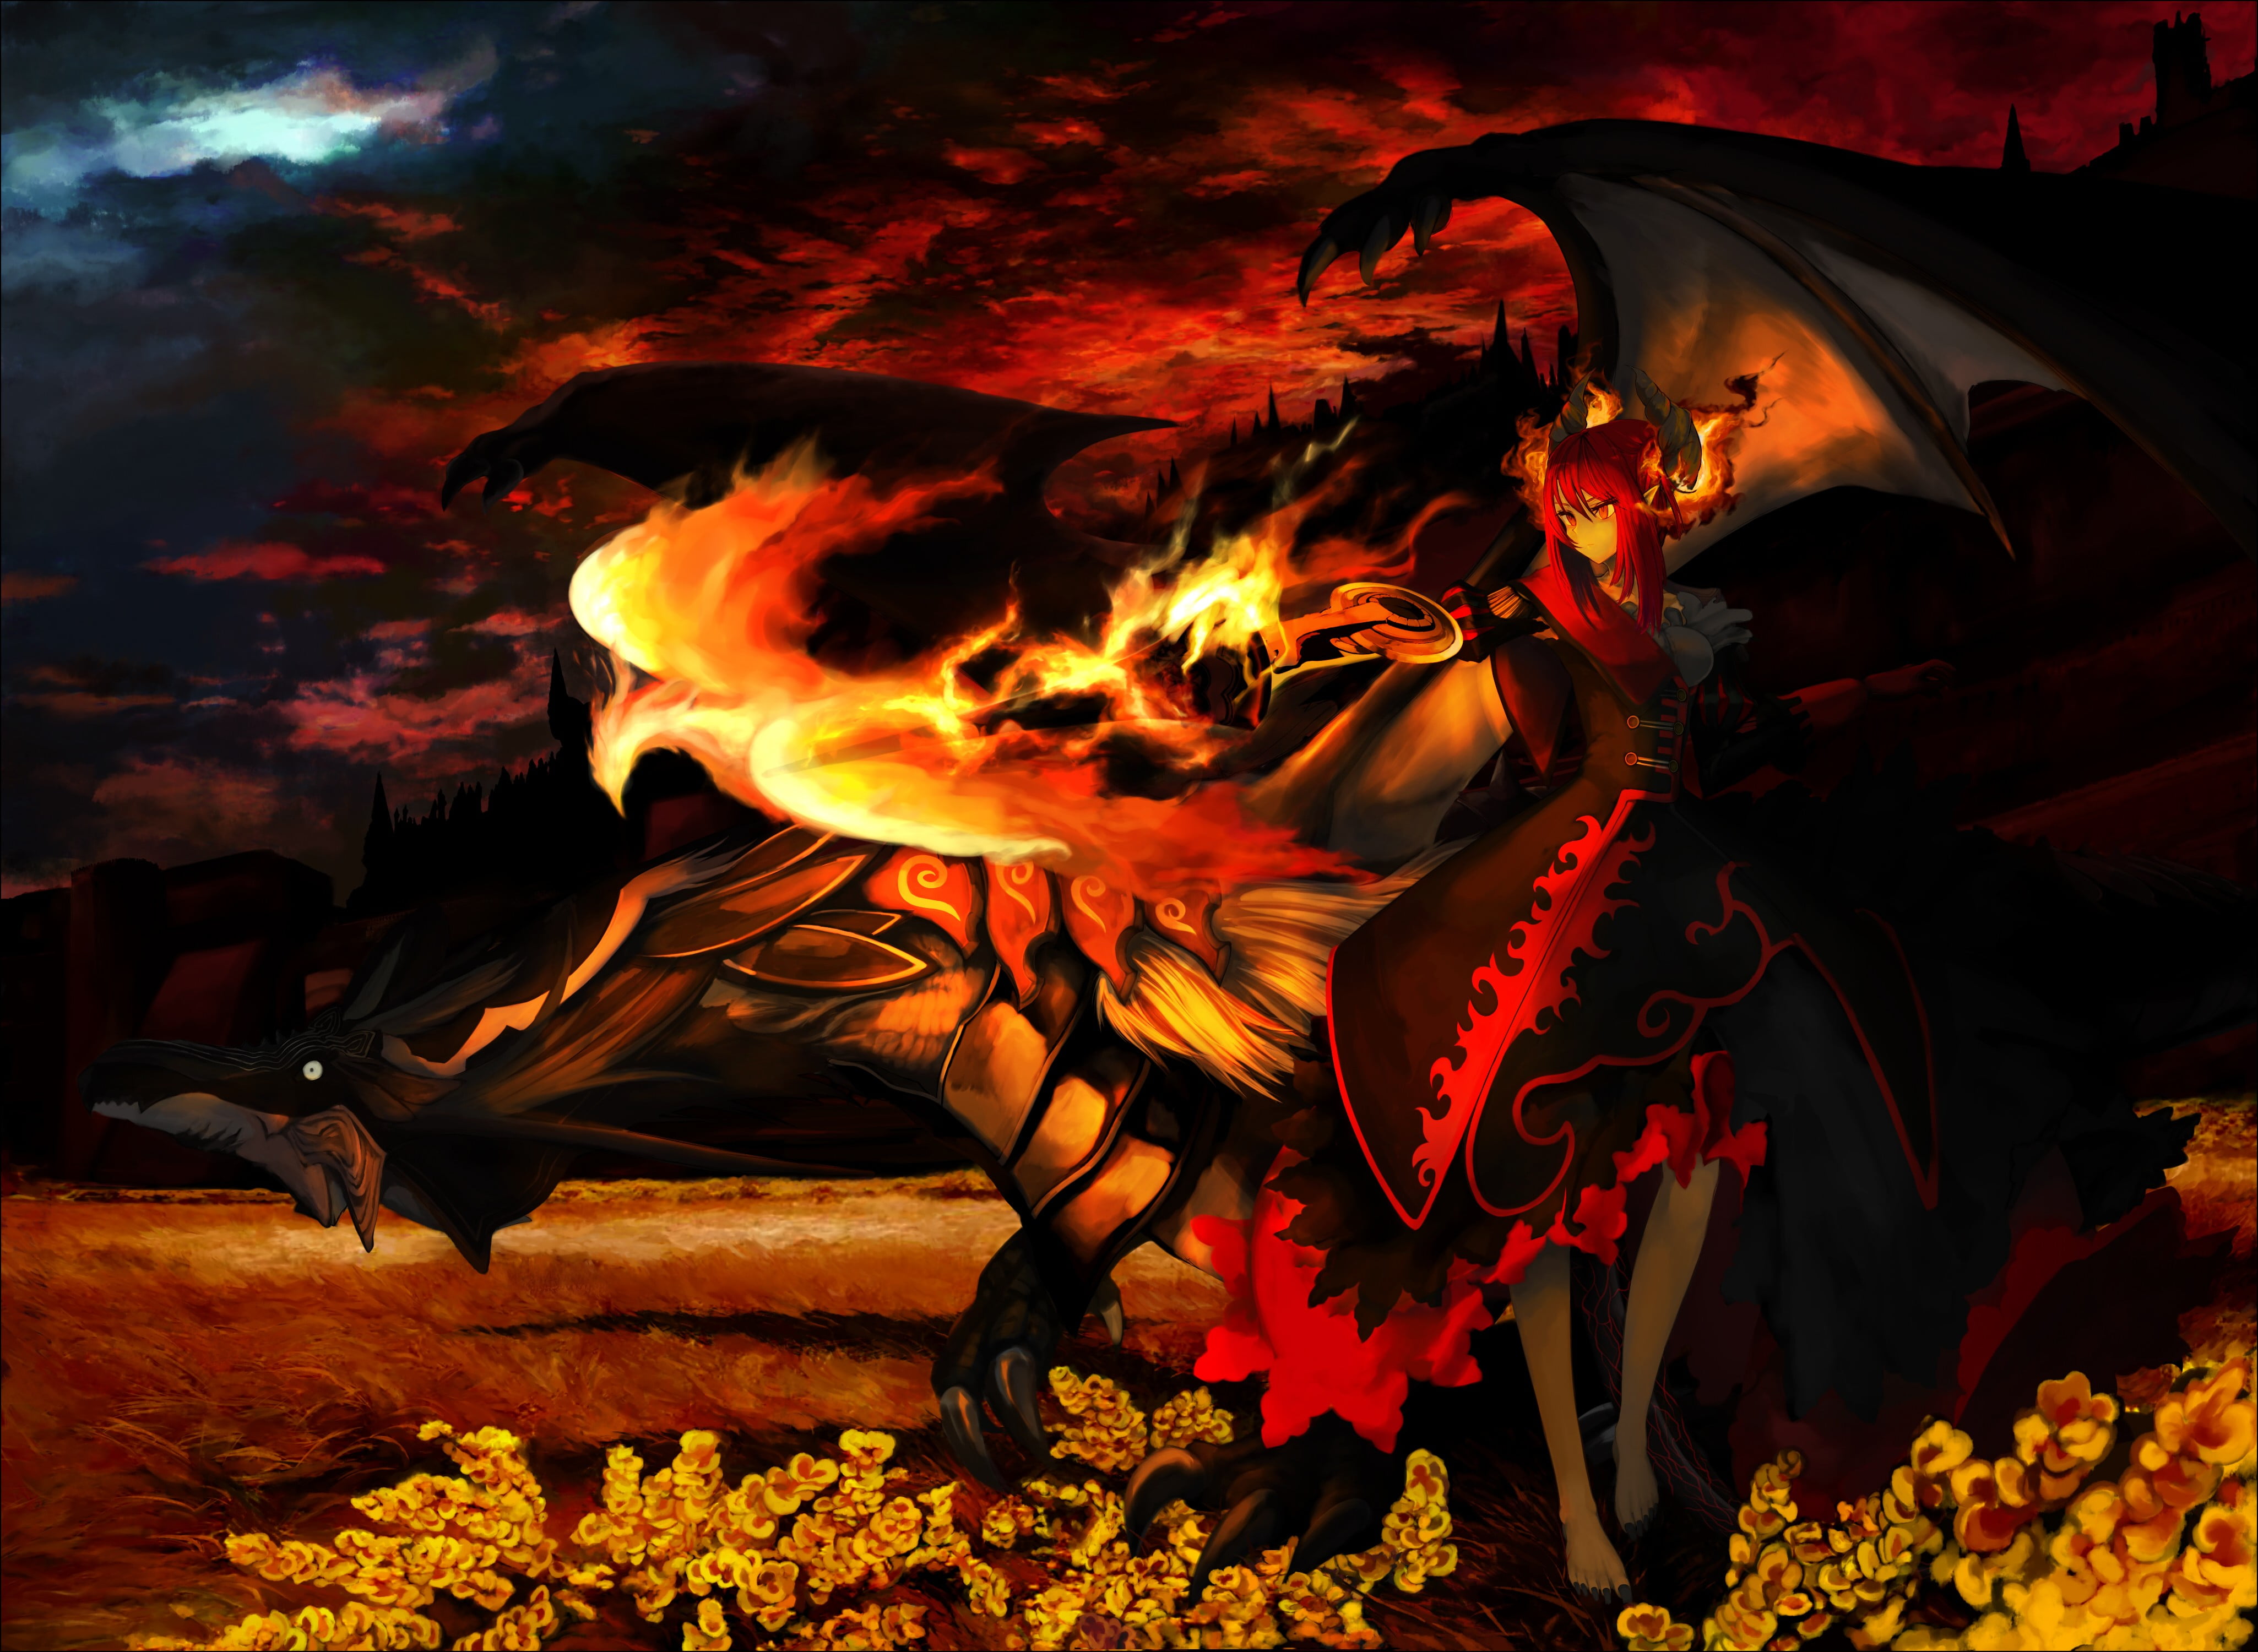 fire wizard with dragon illustration, fire, fantasy art, red